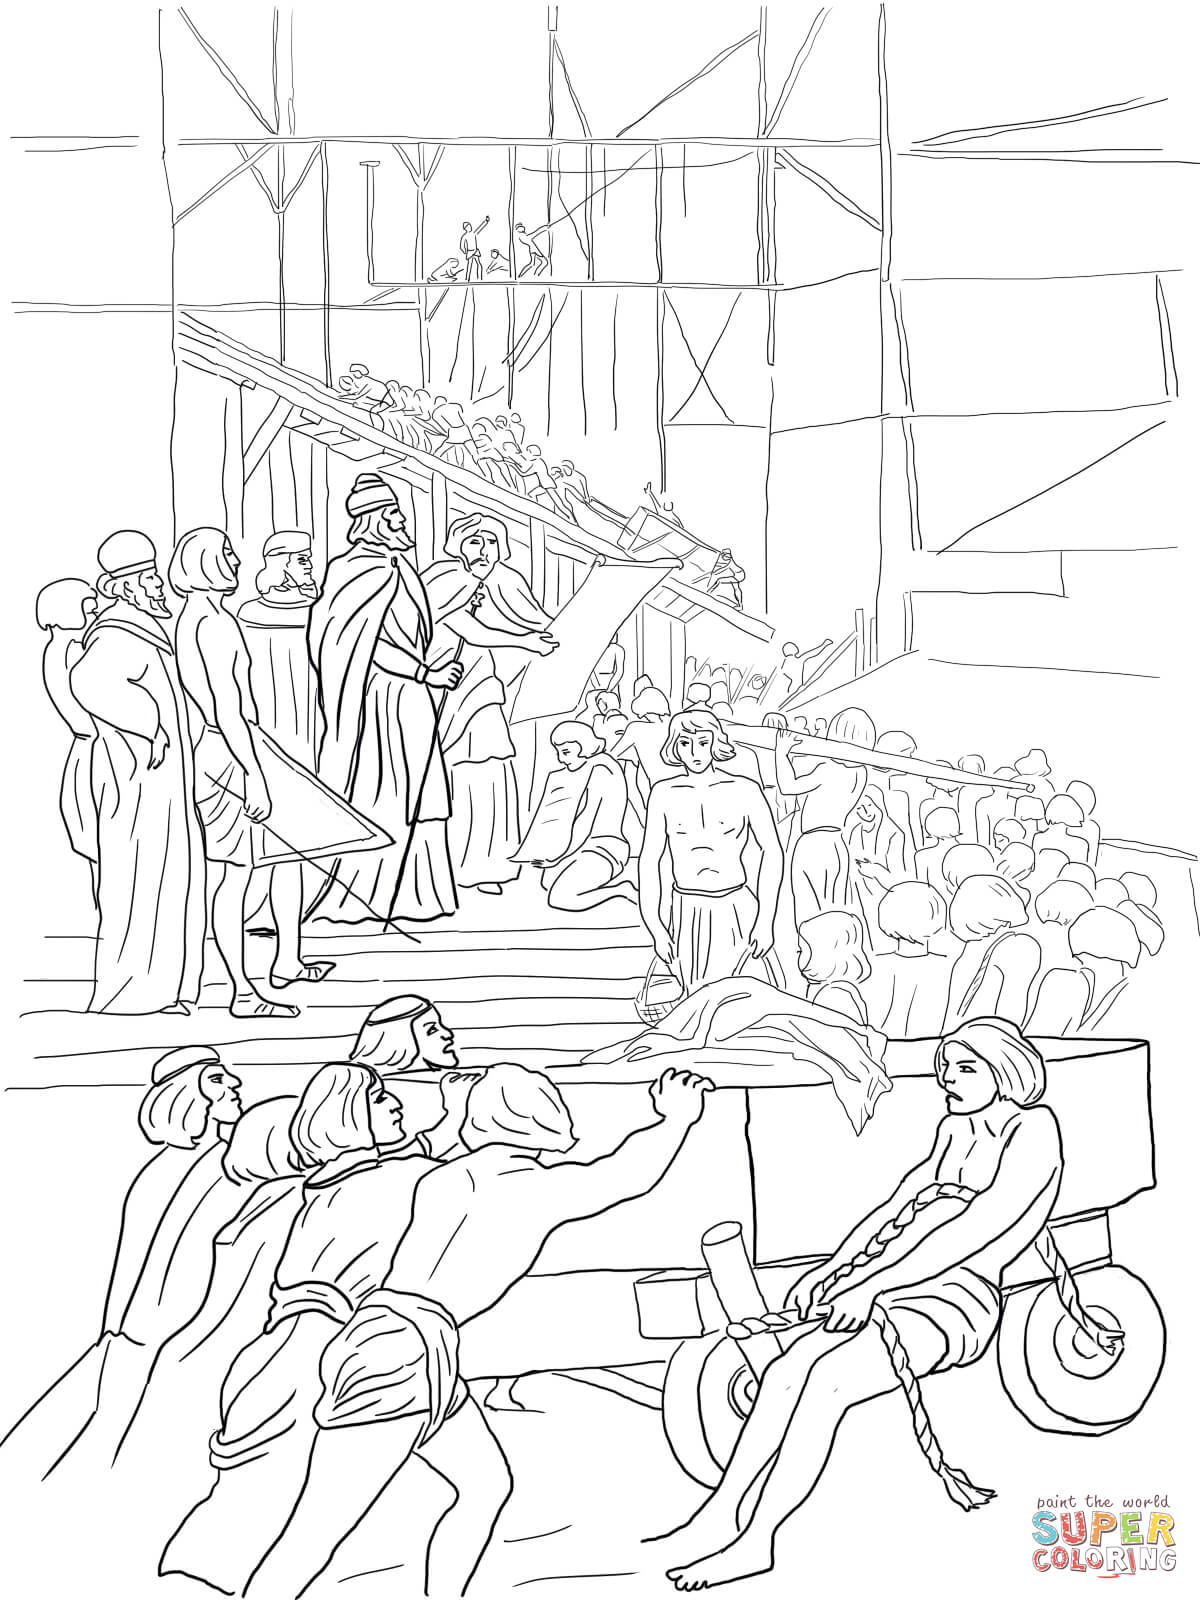 King Solomon Builds the Temple coloring page | Free Printable ...